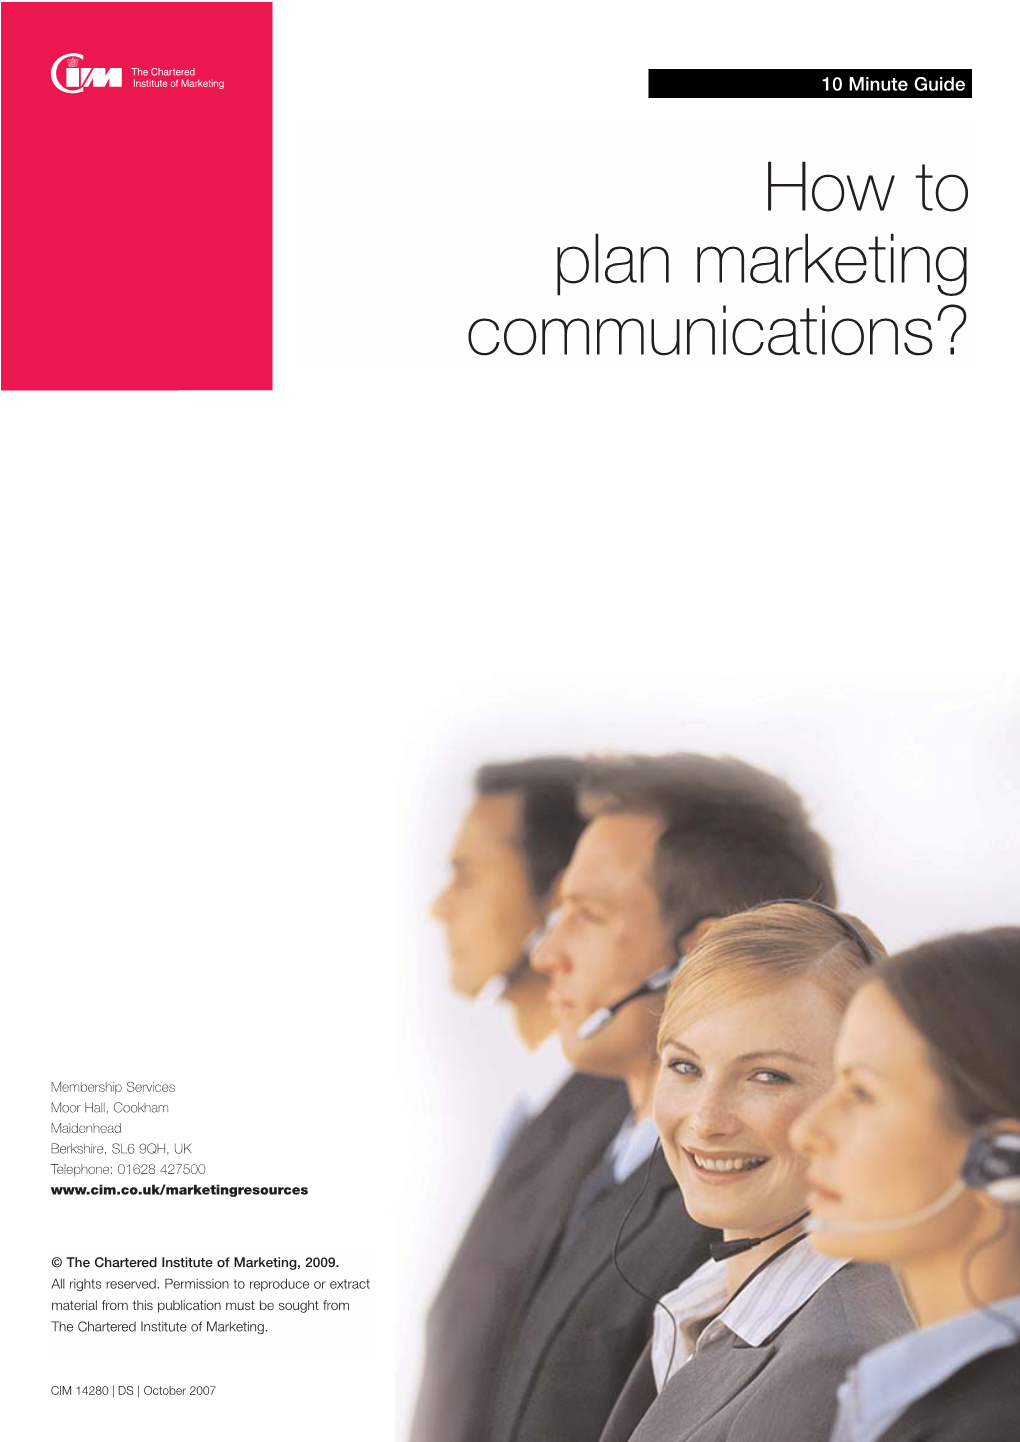 How to Plan Marketing Communications?